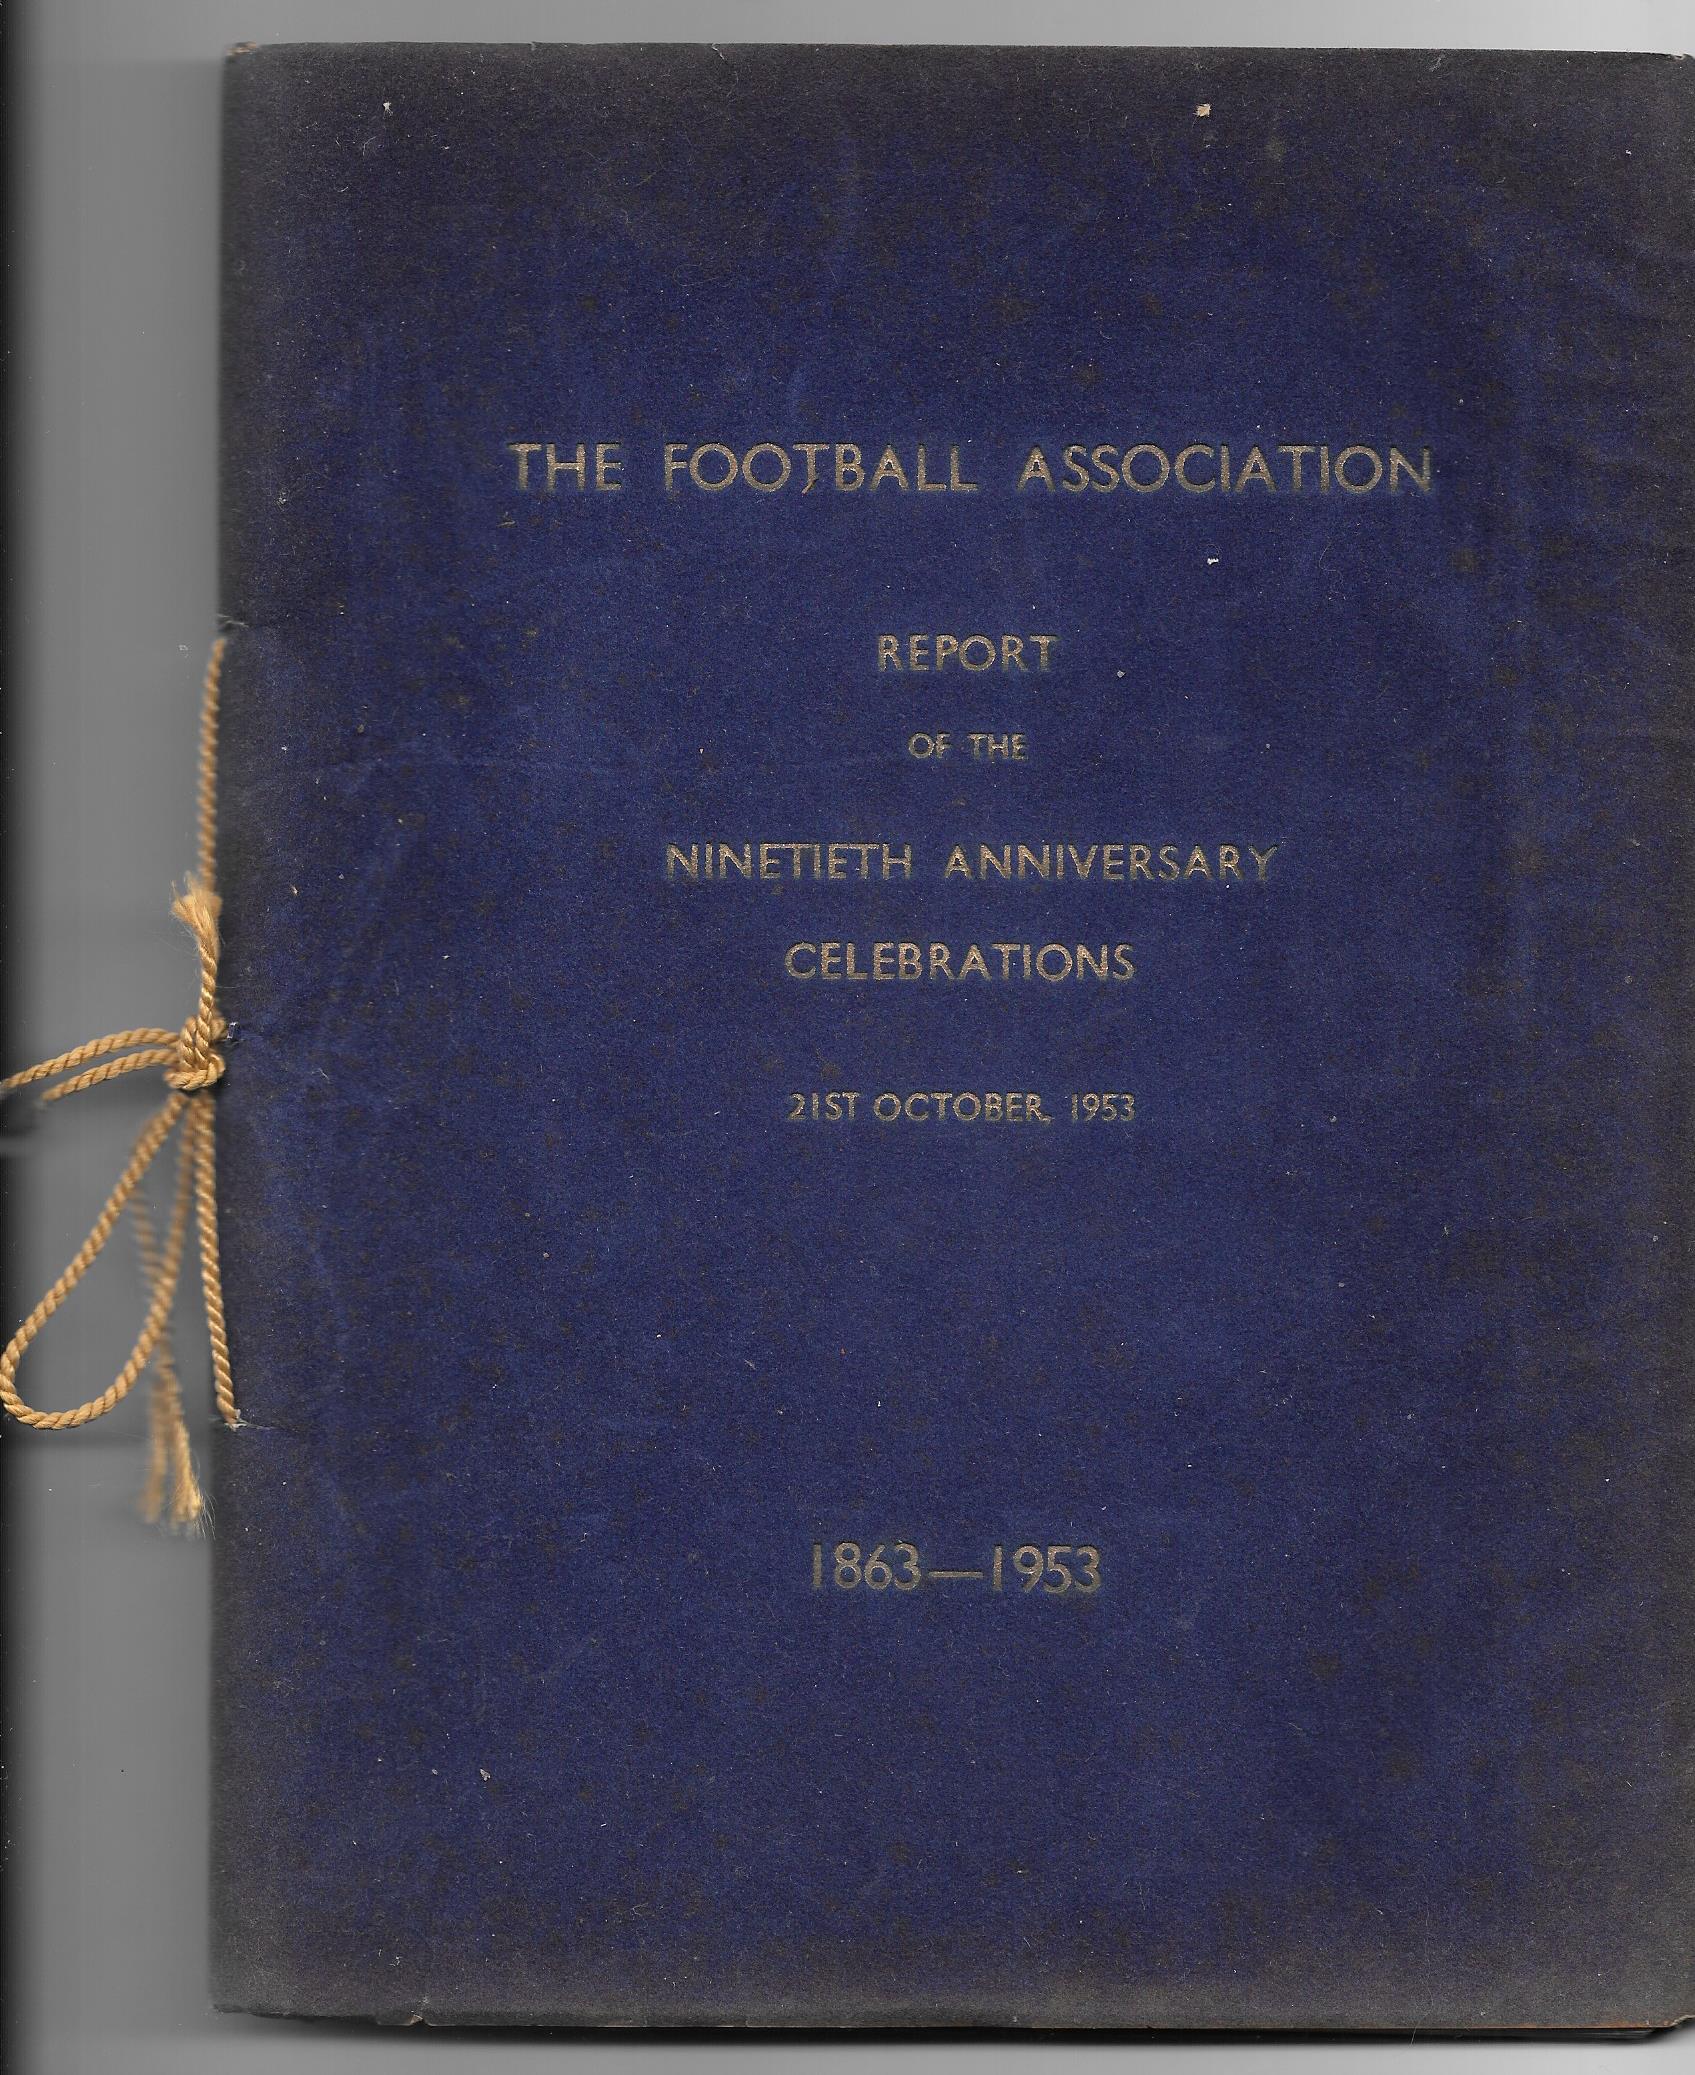 1953 FOOTBALL ASSOCIATION REPORT ON THE 90TH ANNIVERSARY CELEBRATIONS